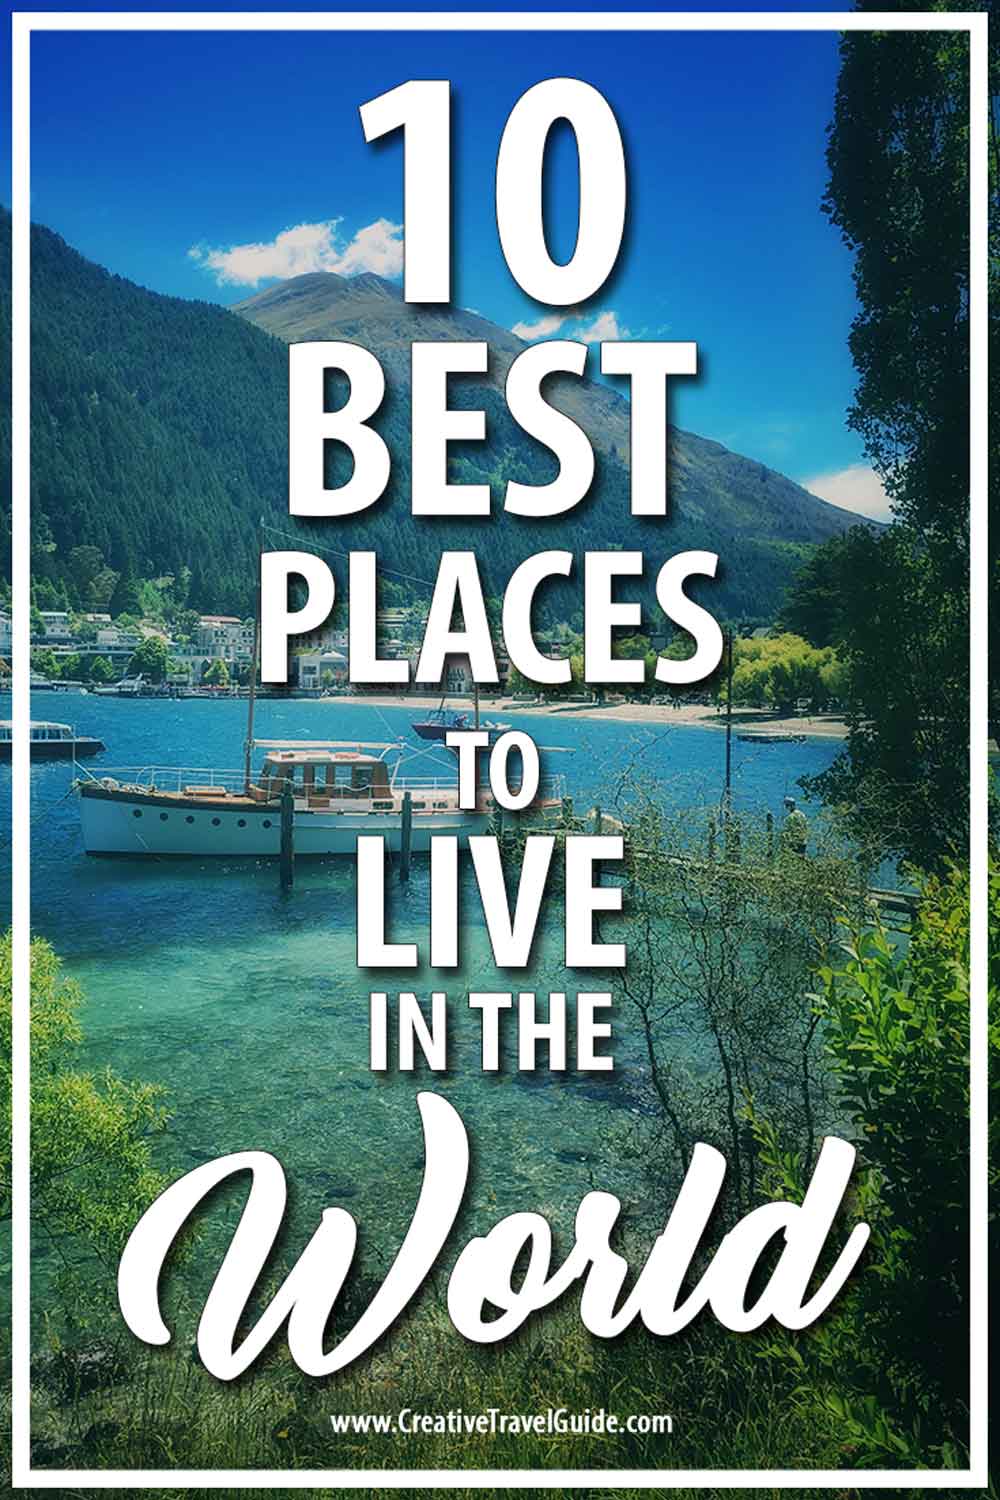 The best place to live in the world